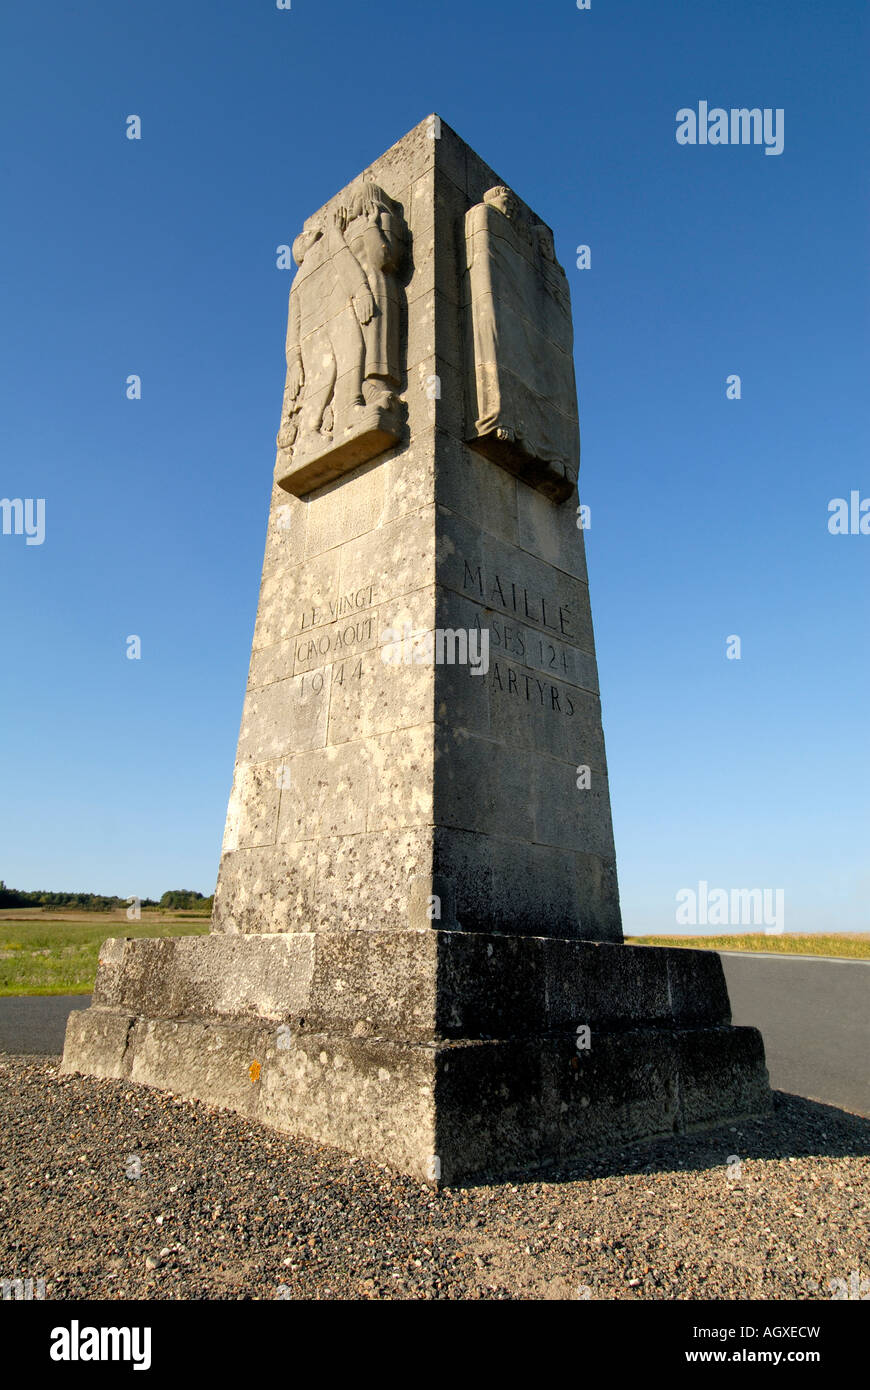 Memorial (on N10 trunk road south of St.Maure-de-Touraine) ) to Martyrs of Maille, Indre-et-Loire, France. Stock Photo